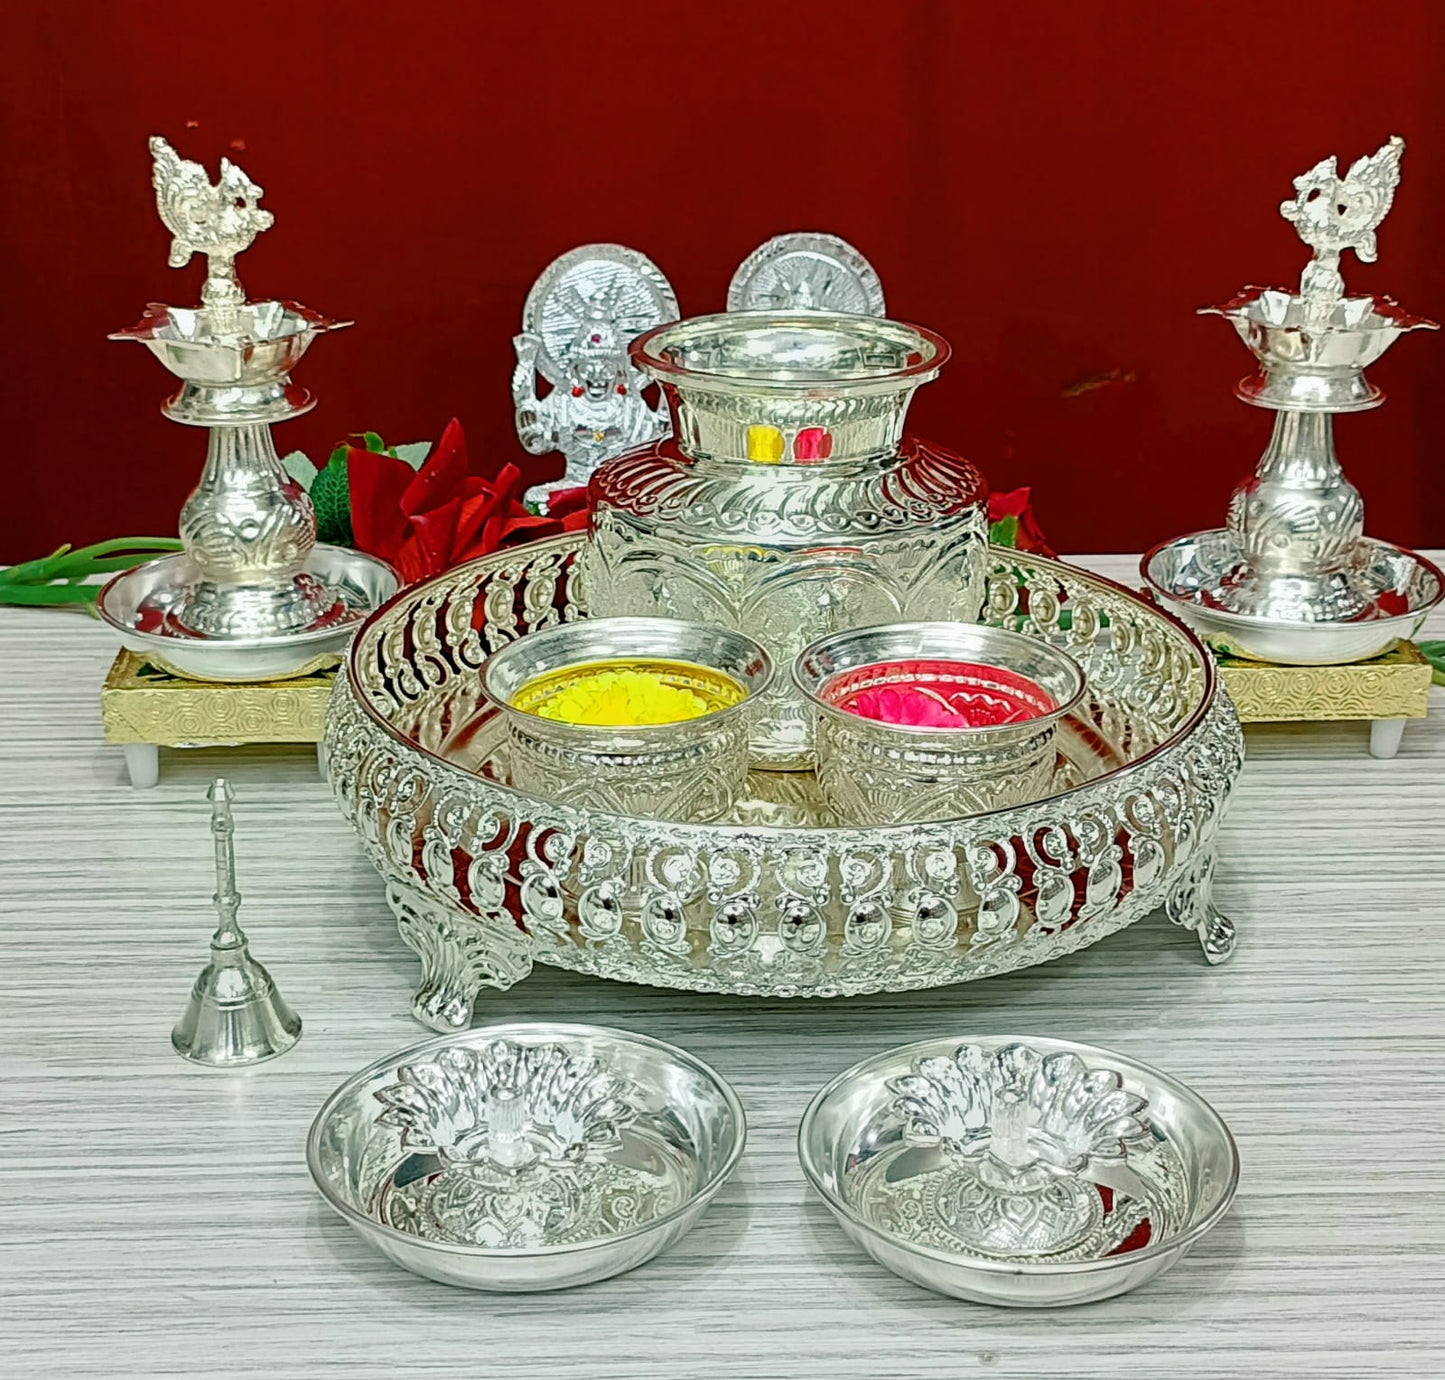 Exquisite Pooja Set with Mina Chowki | German Silver all in One Pooja Set